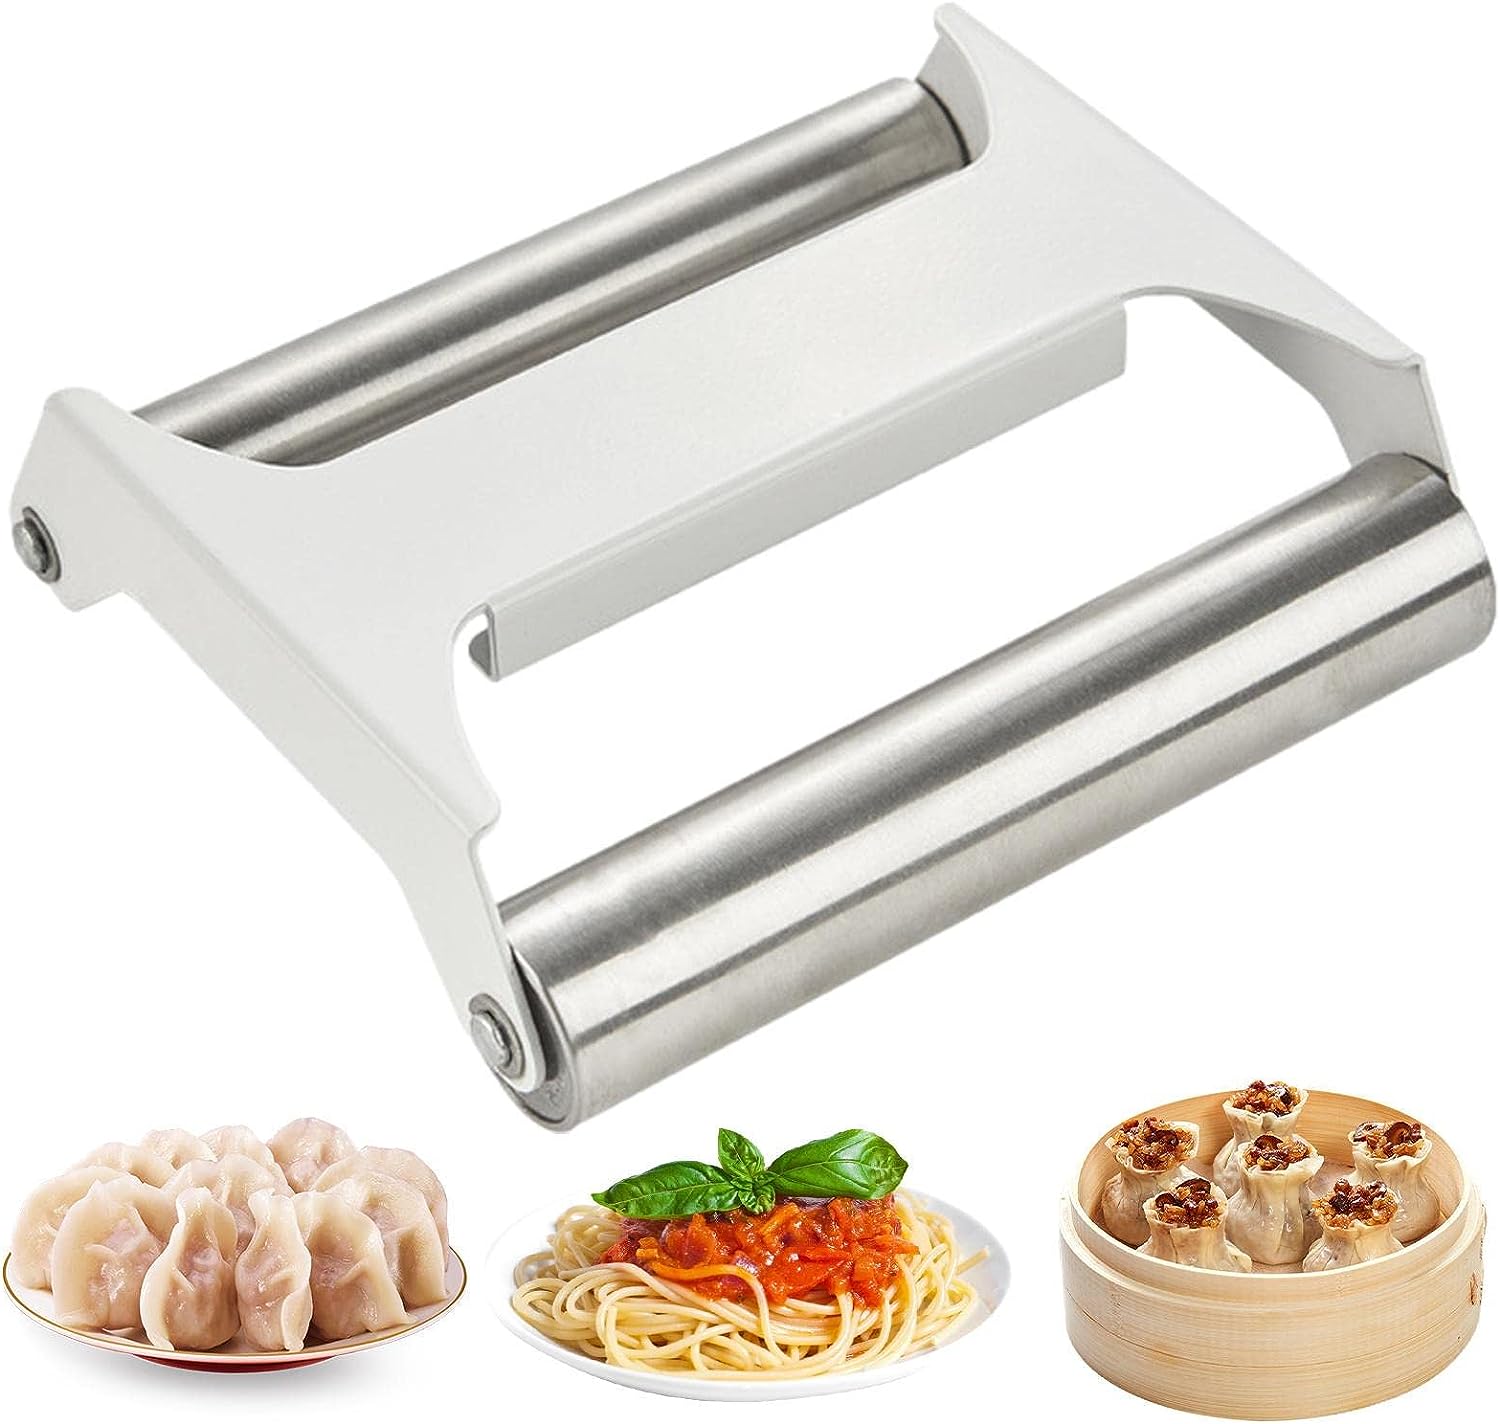 Double-Sided Stainless Steel Dough Roller for Baking next to some foods